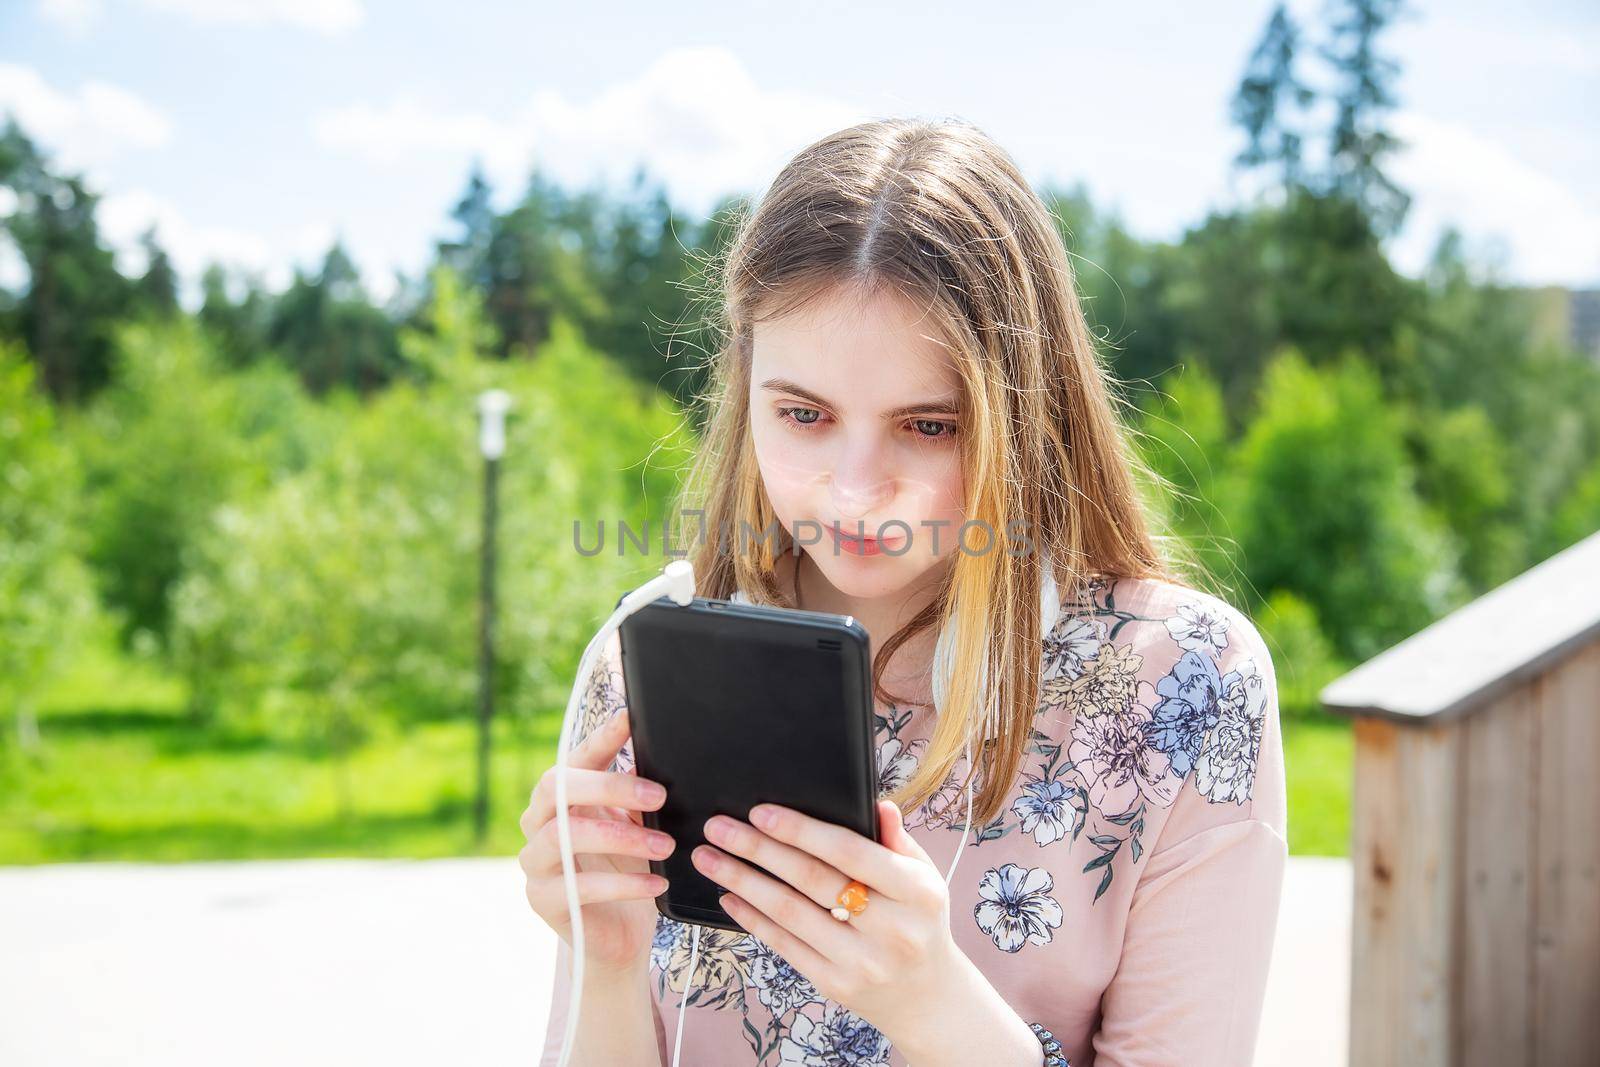 A young girl 20 years old Caucasian appearance looks into her mobile phone, writes a text message while sitting on a wooden podium in the park on a summer day.The girl is dressed in a floral T-shirt